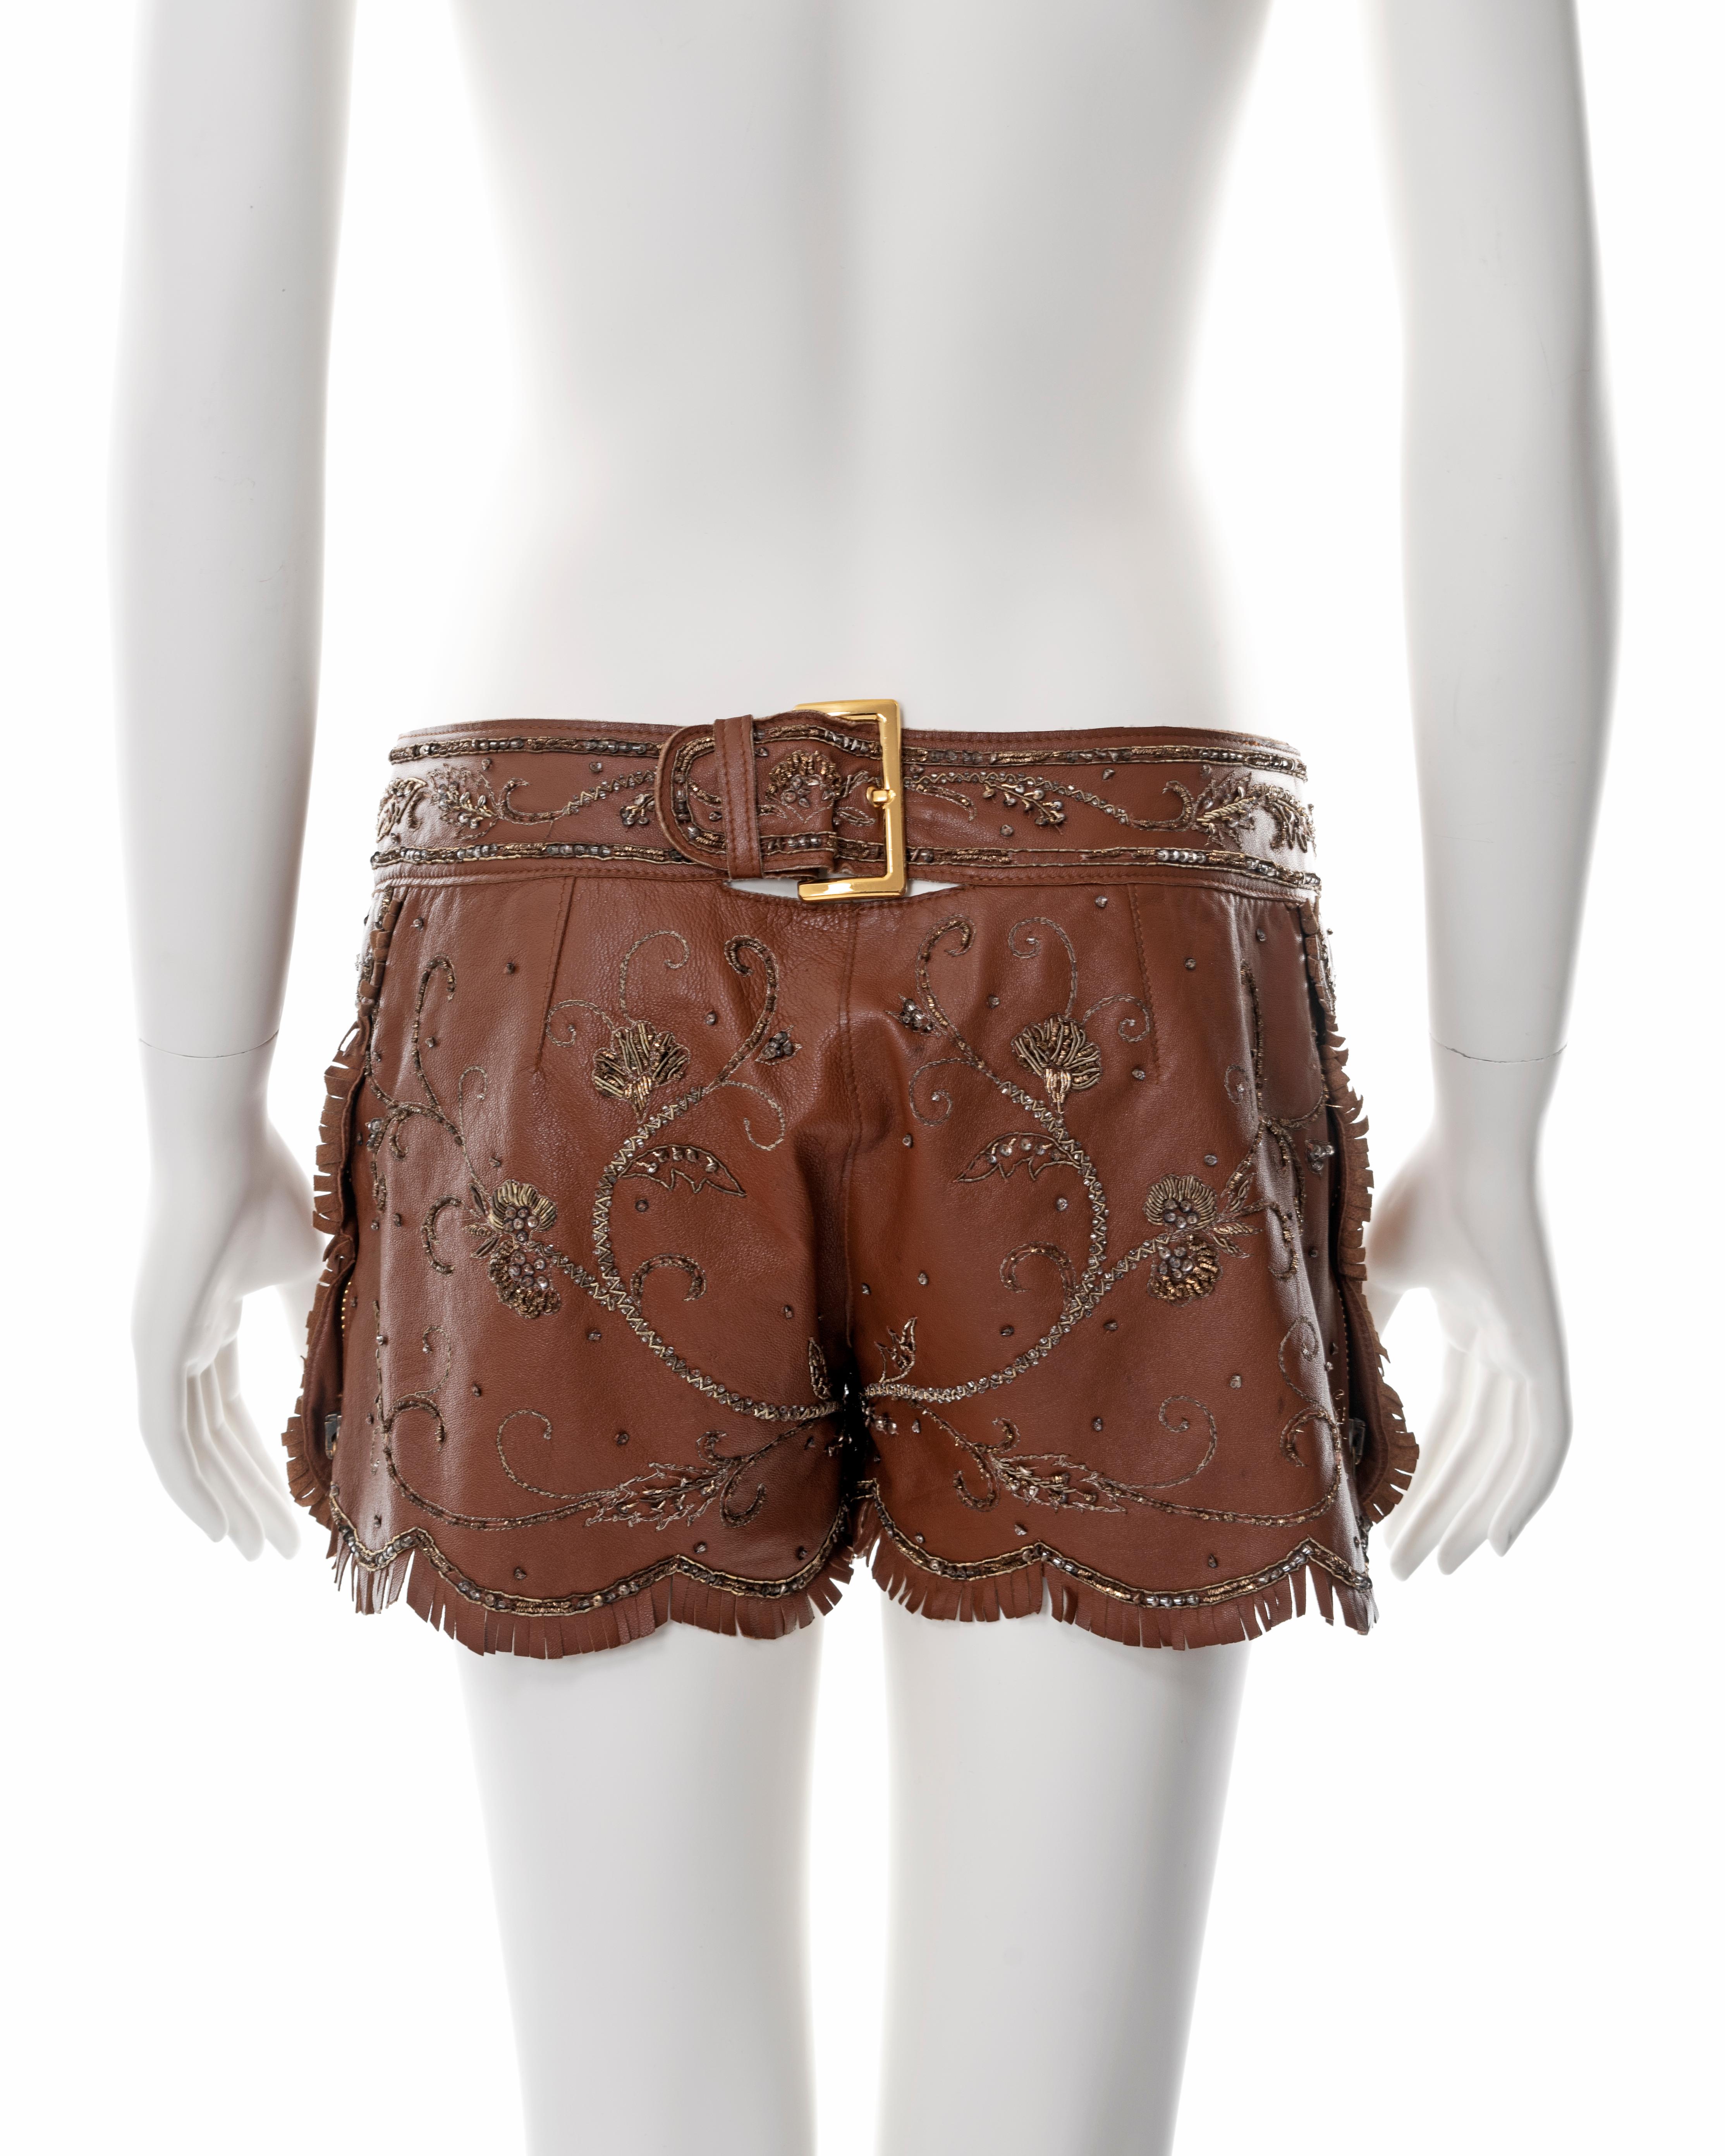 Dolce & Gabbana embroidered brown leather hot pants, ss 2001 3